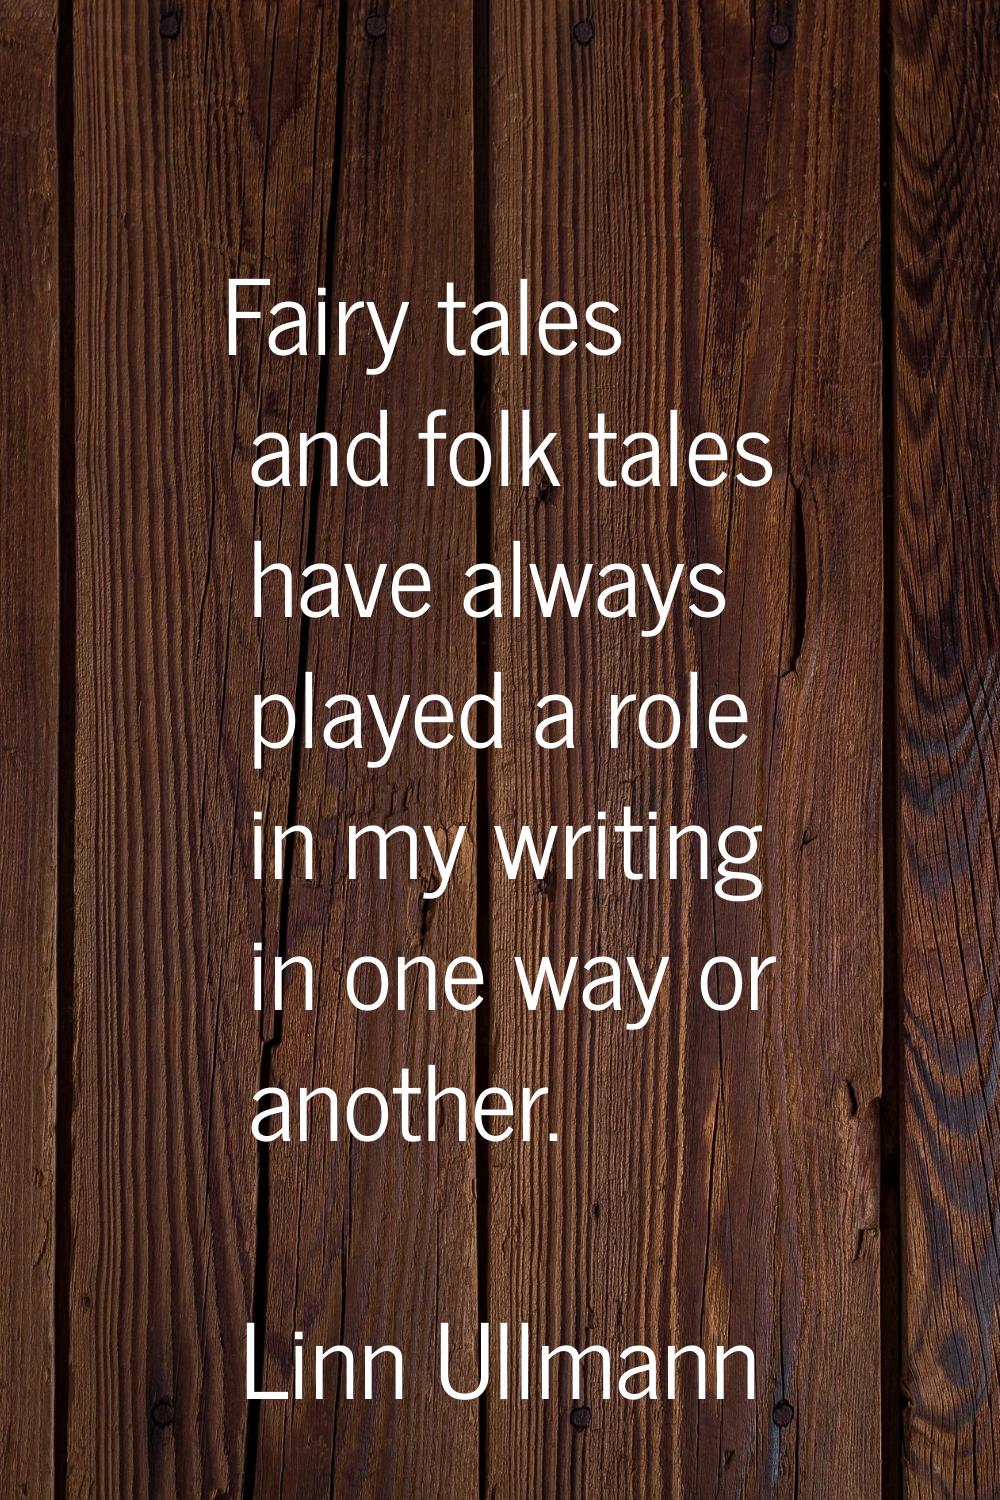 Fairy tales and folk tales have always played a role in my writing in one way or another.